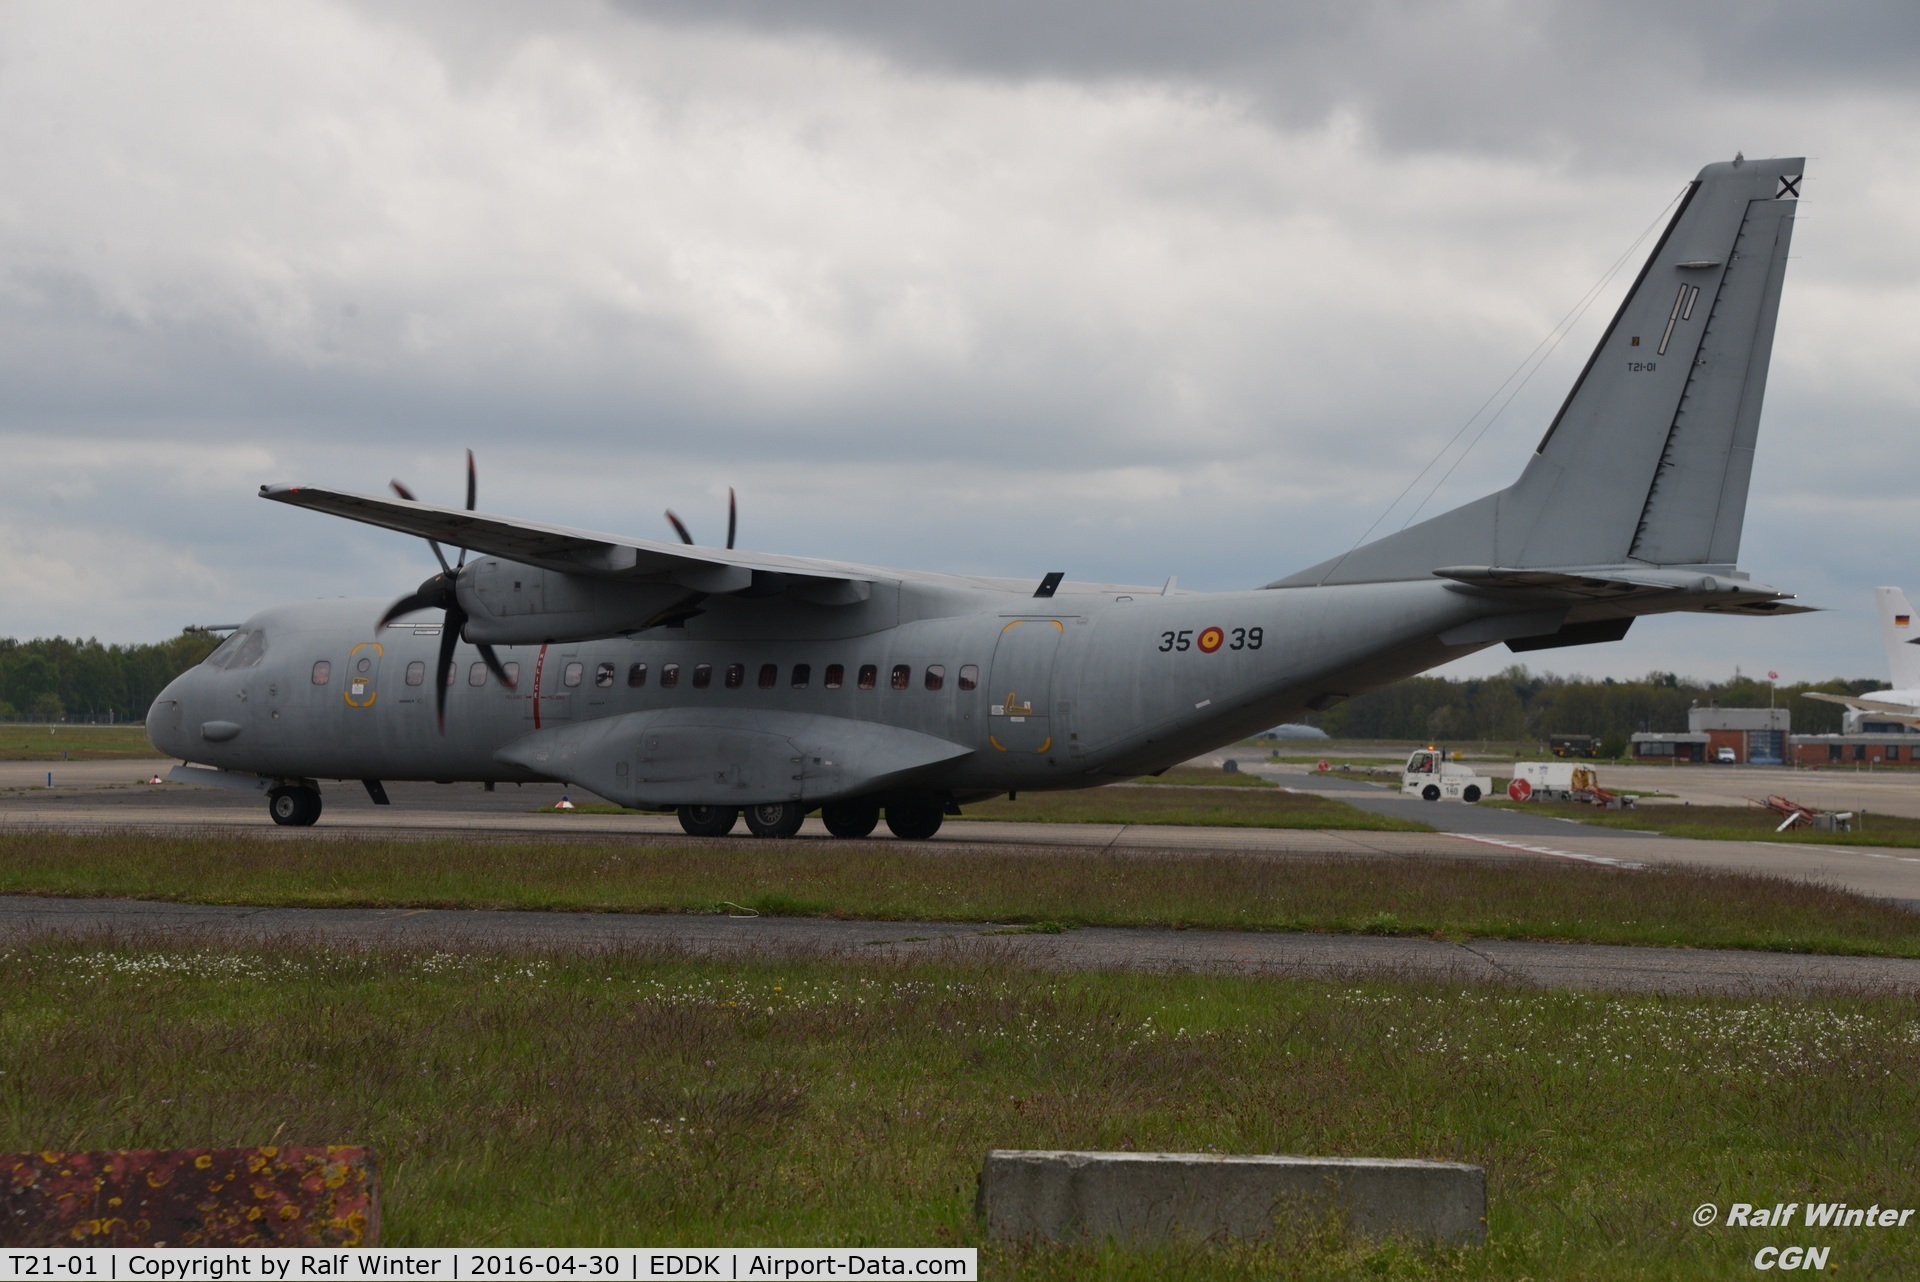 T21-01, 2001 CASA C-295M C/N EA03-02-002, CASA C-295M - AME Spanish Air Force - T21-01 35-39 - 30.04.2016 - CGN